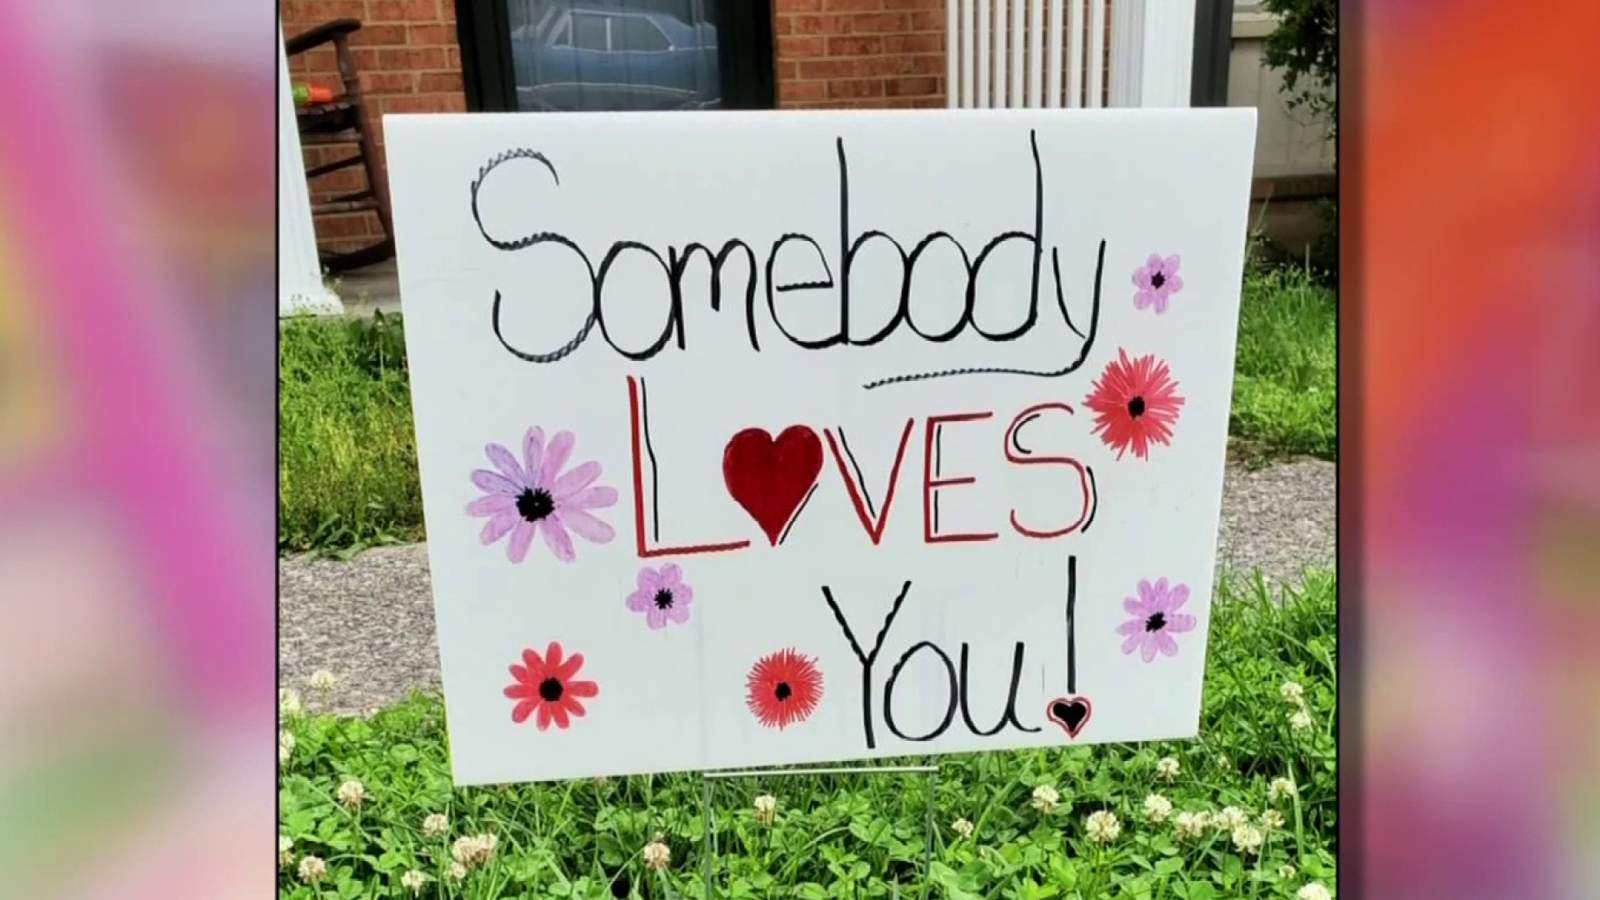 ‘A smile costs nothing’: Local non-profit encouraging random acts of kindness in February